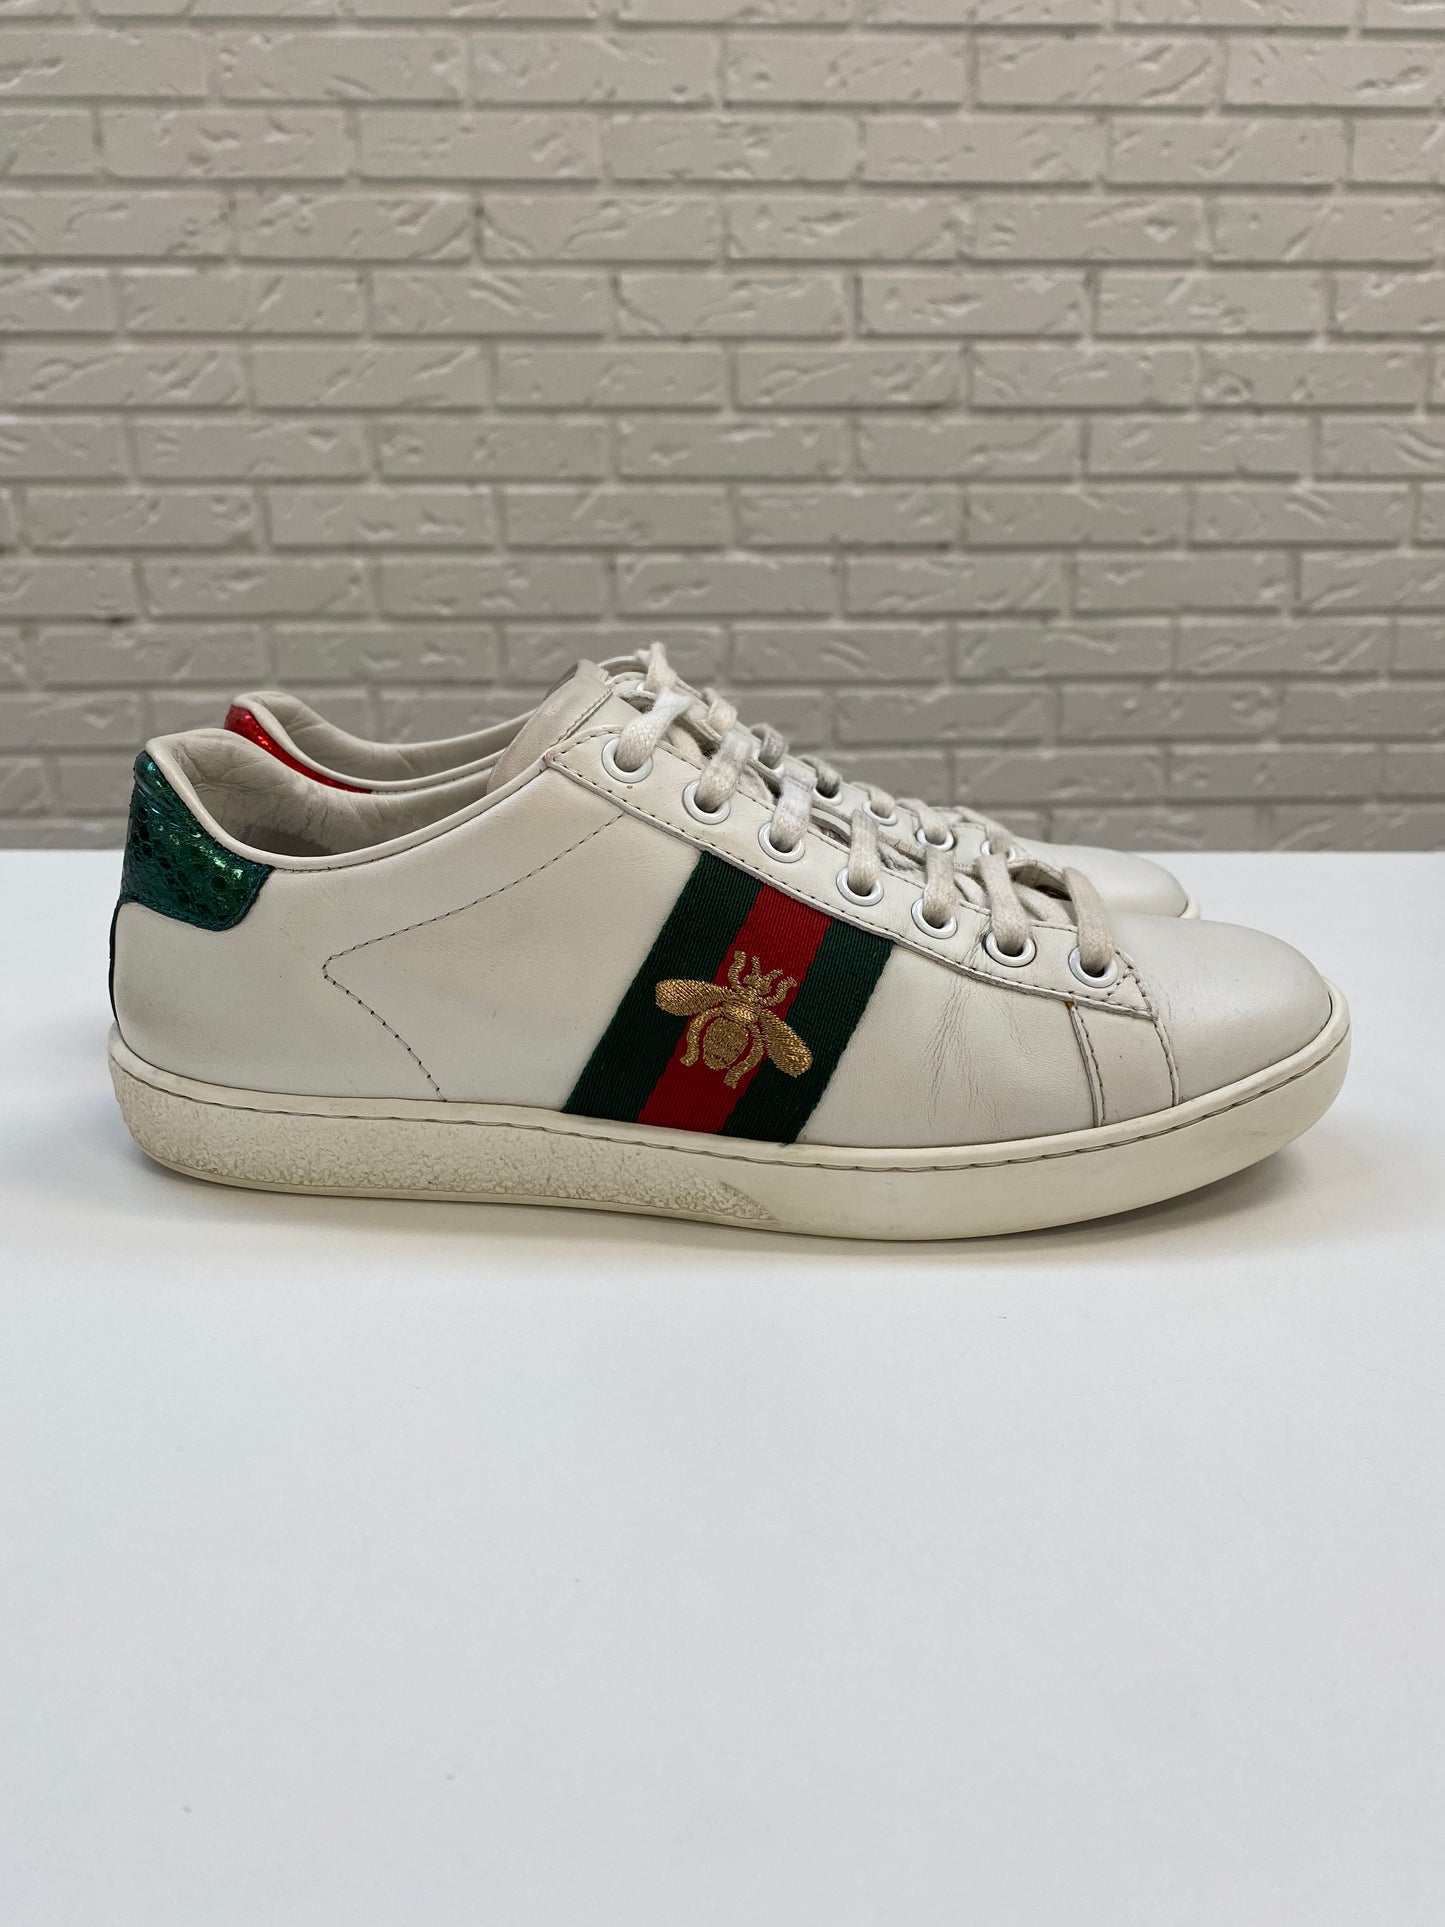 Gucci Ace “Bee” (36)